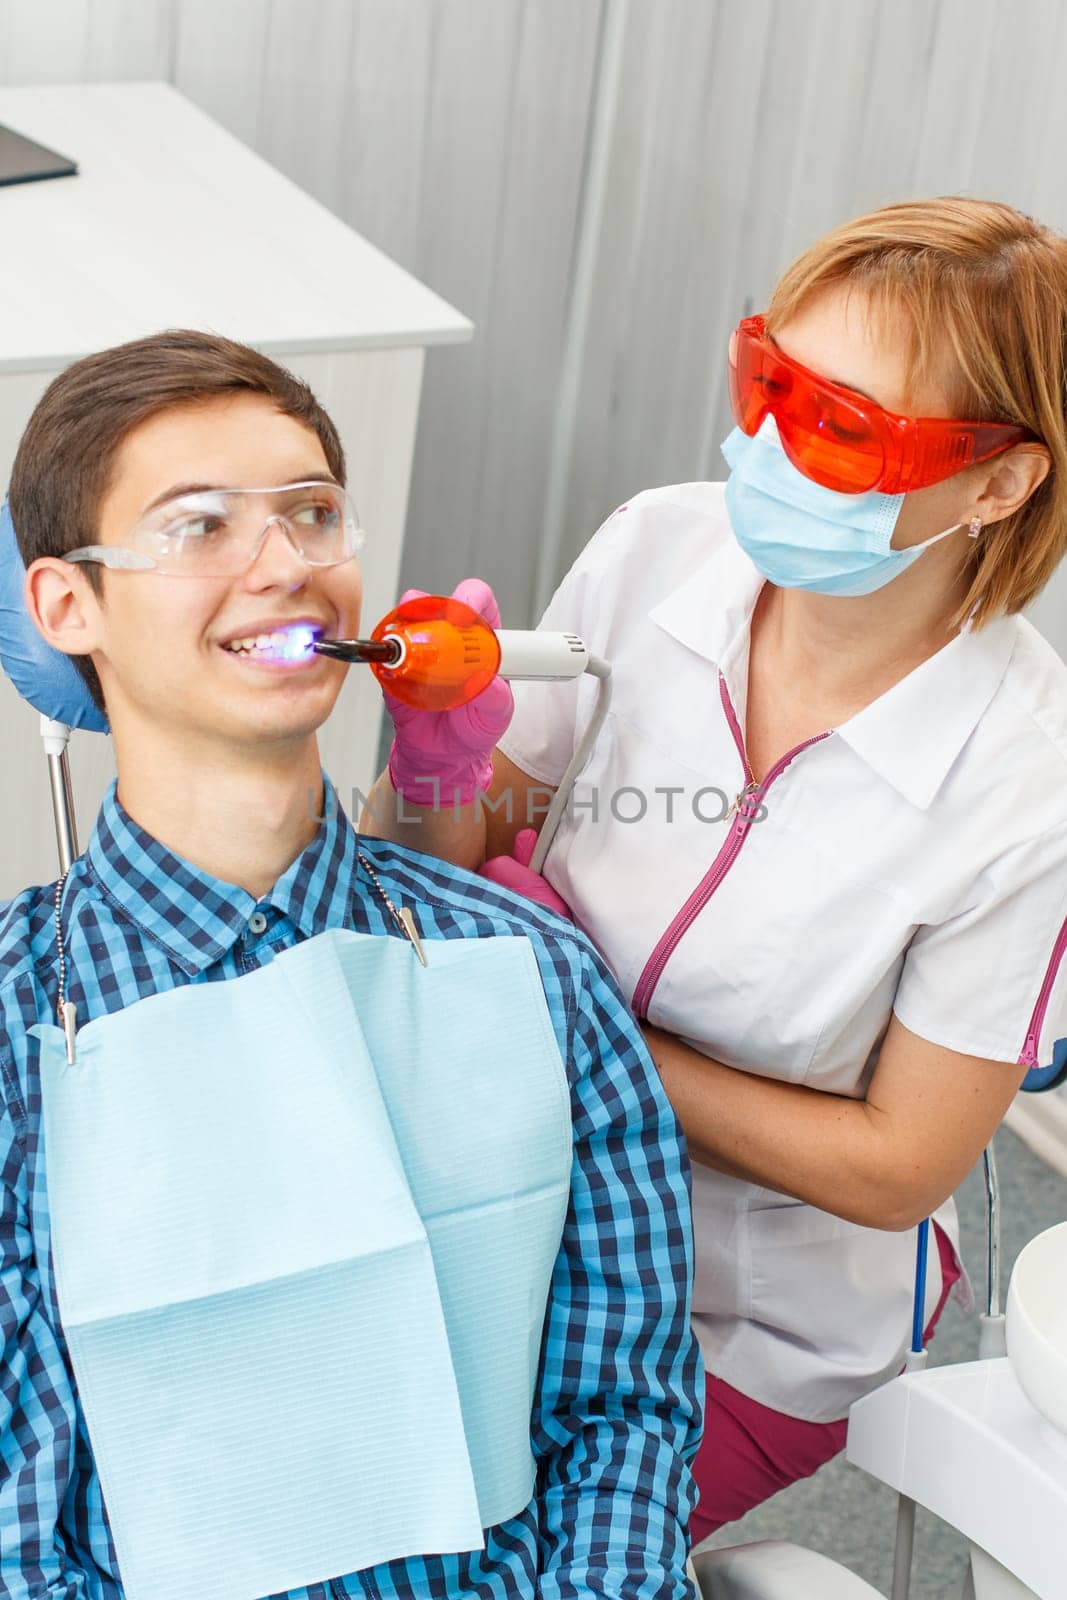 Beautiful woman dentist treating teeth in dental office. Doctor wearing glasses, mask, white uniform and pink gloves. Selective focus on a dentist